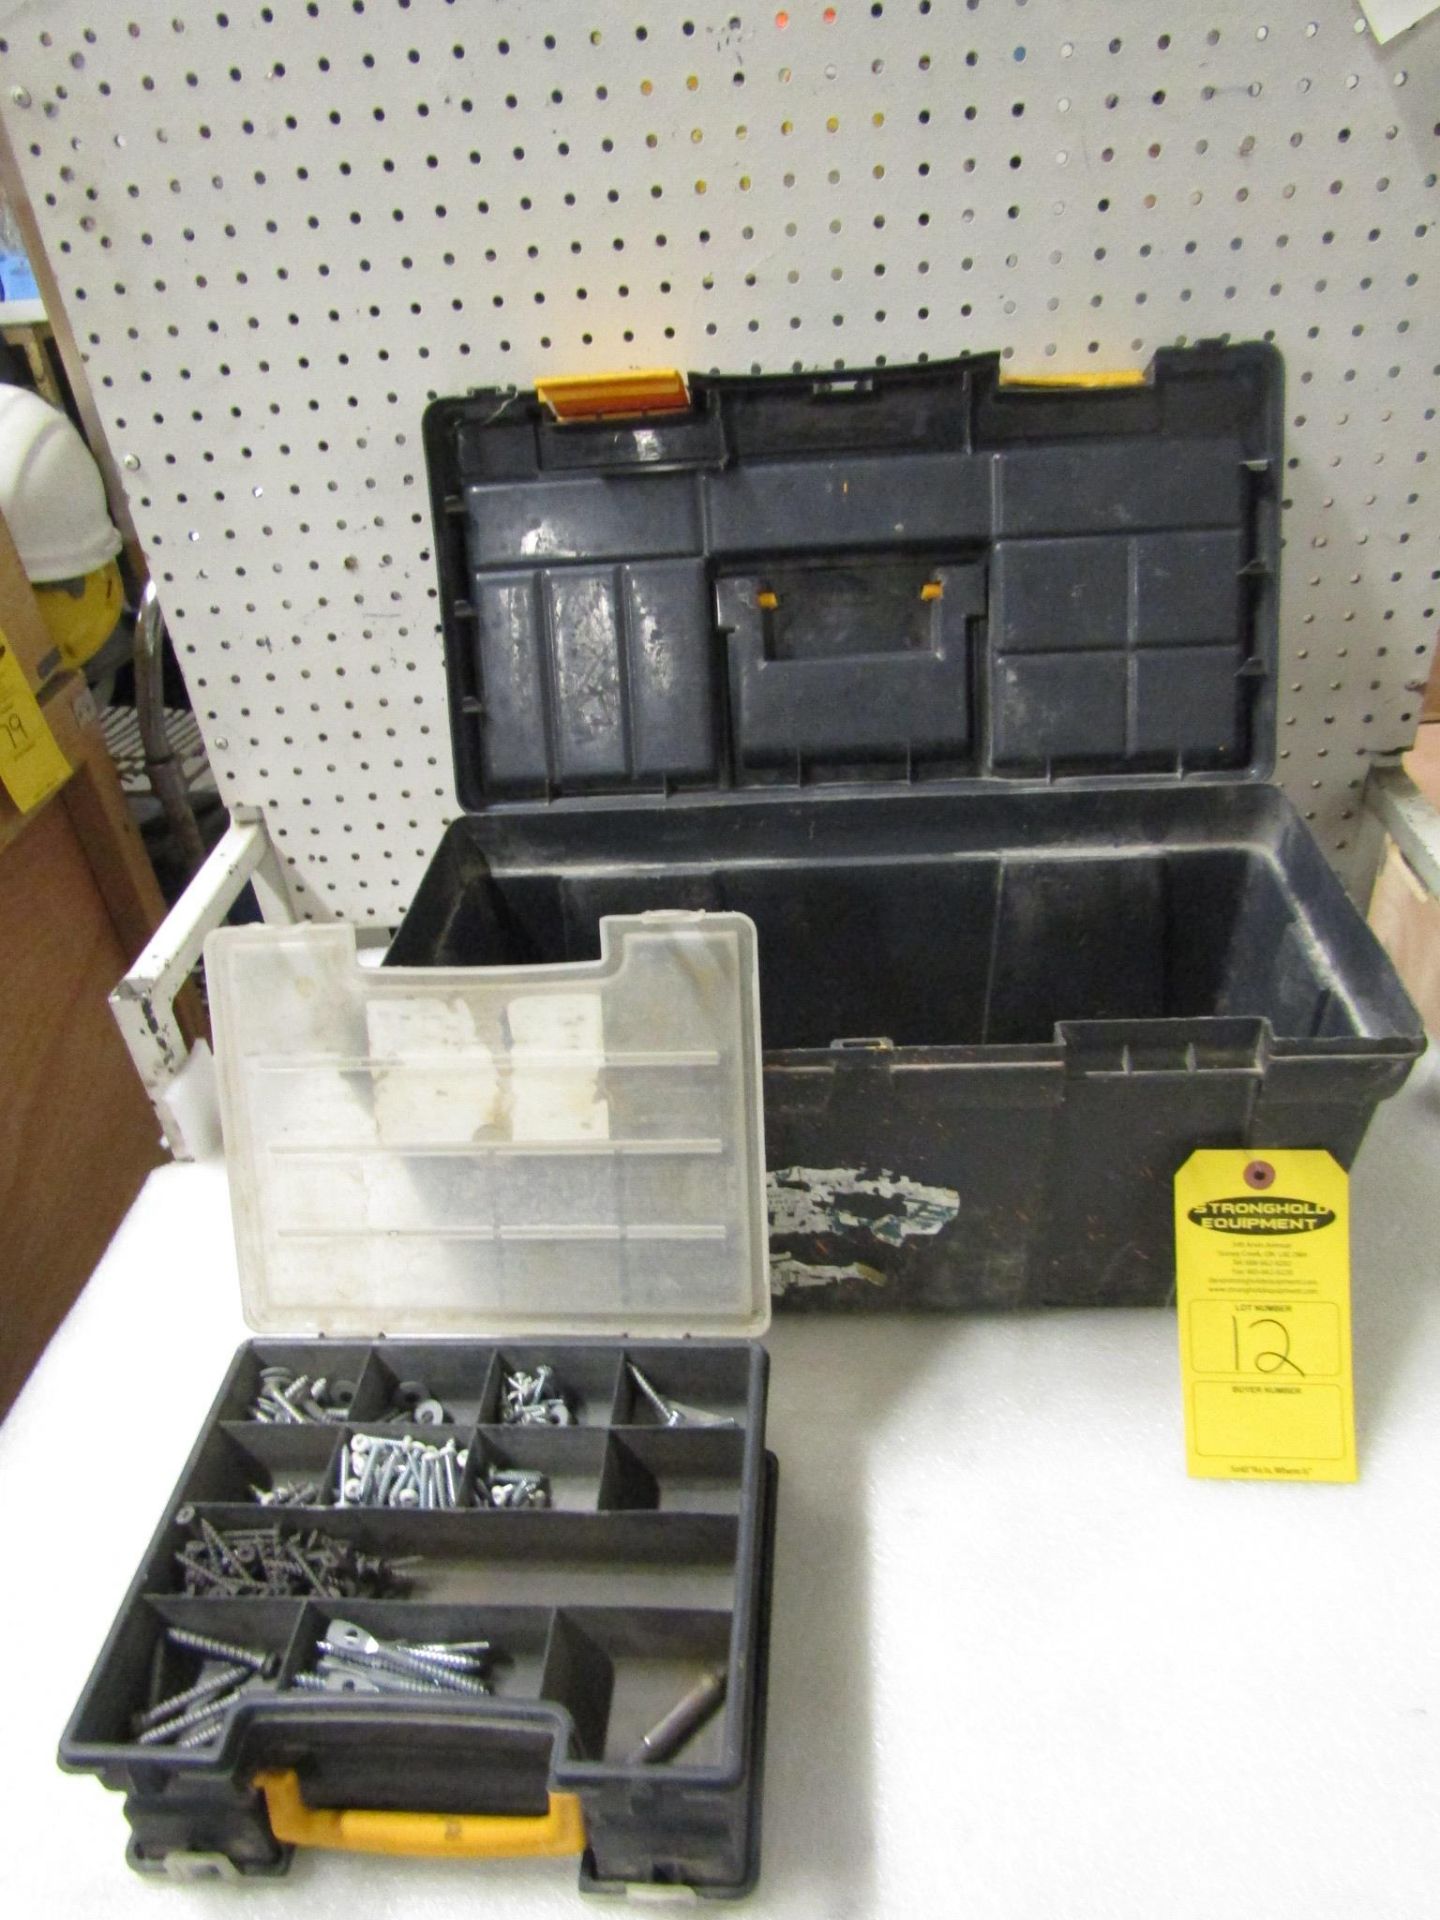 Holt Tool Boxes